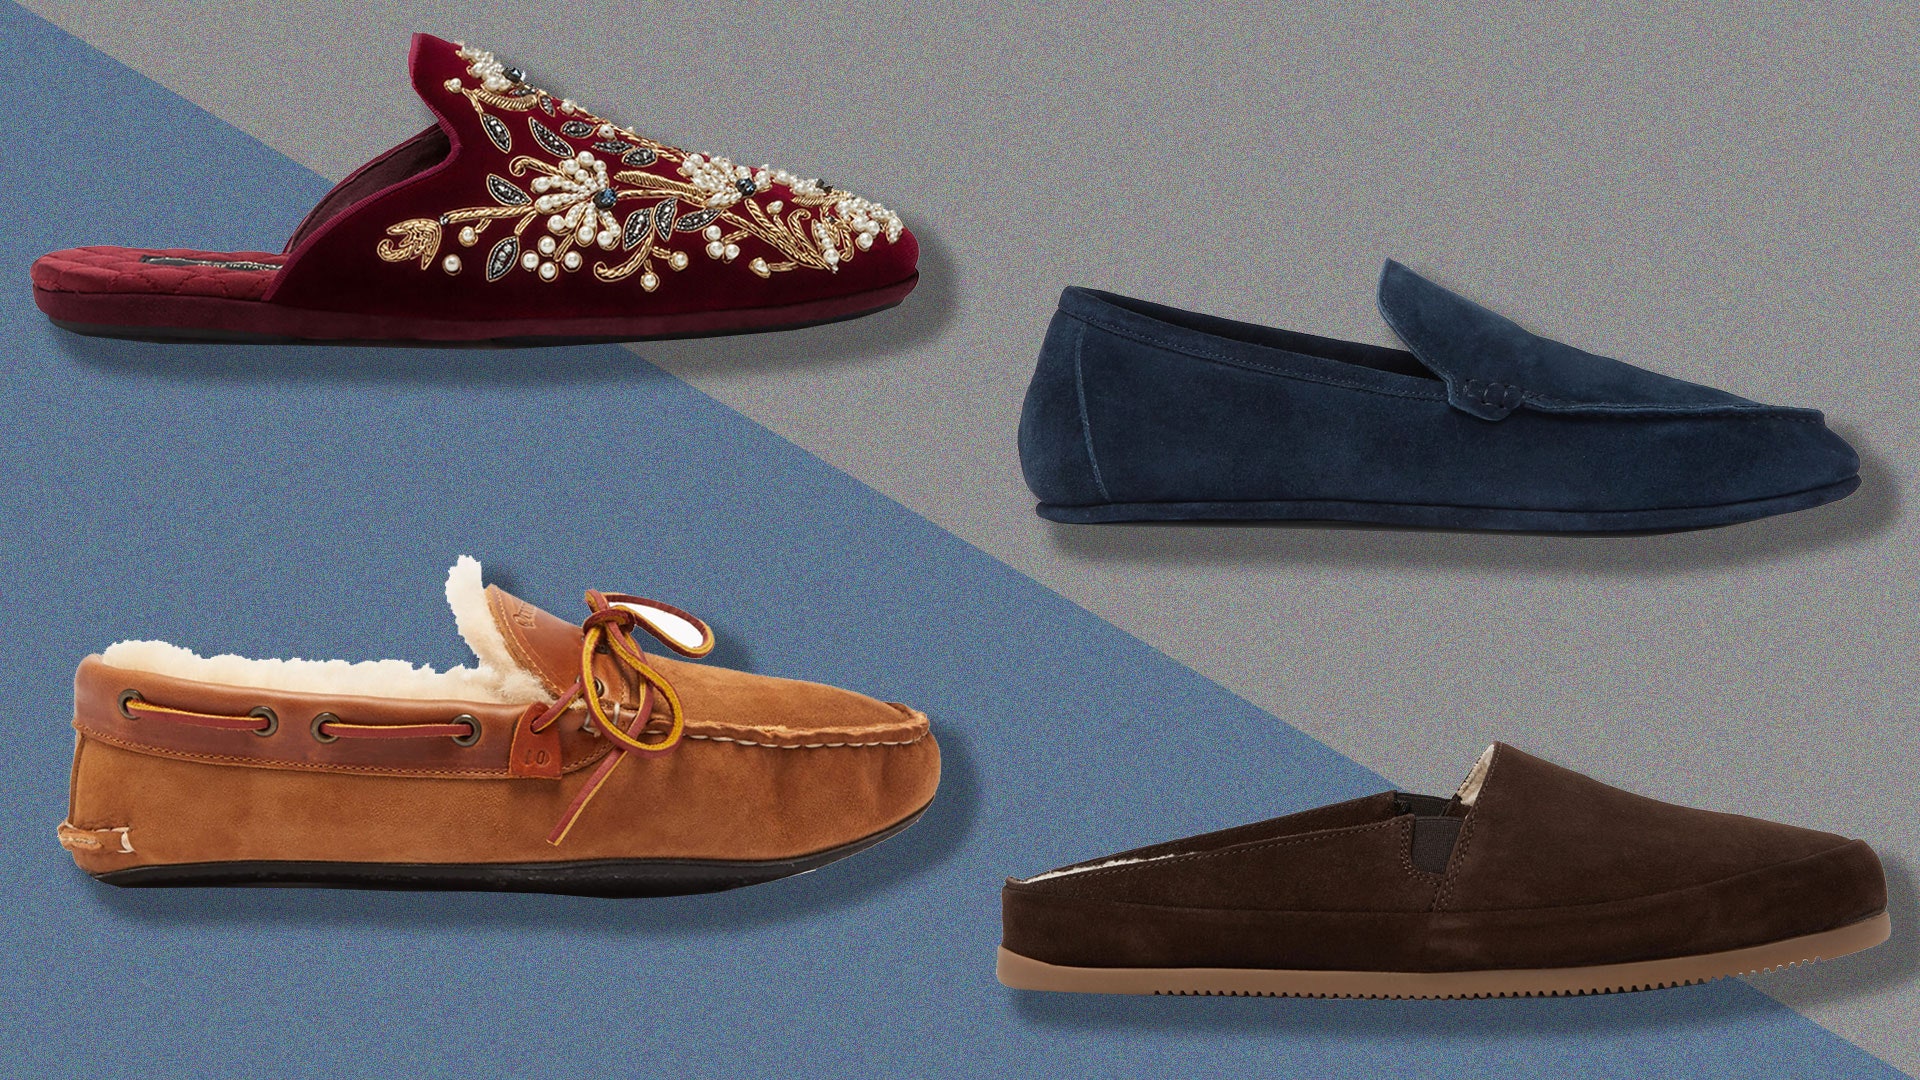 How to choose the perfect men's high-end slippers for a personal gift